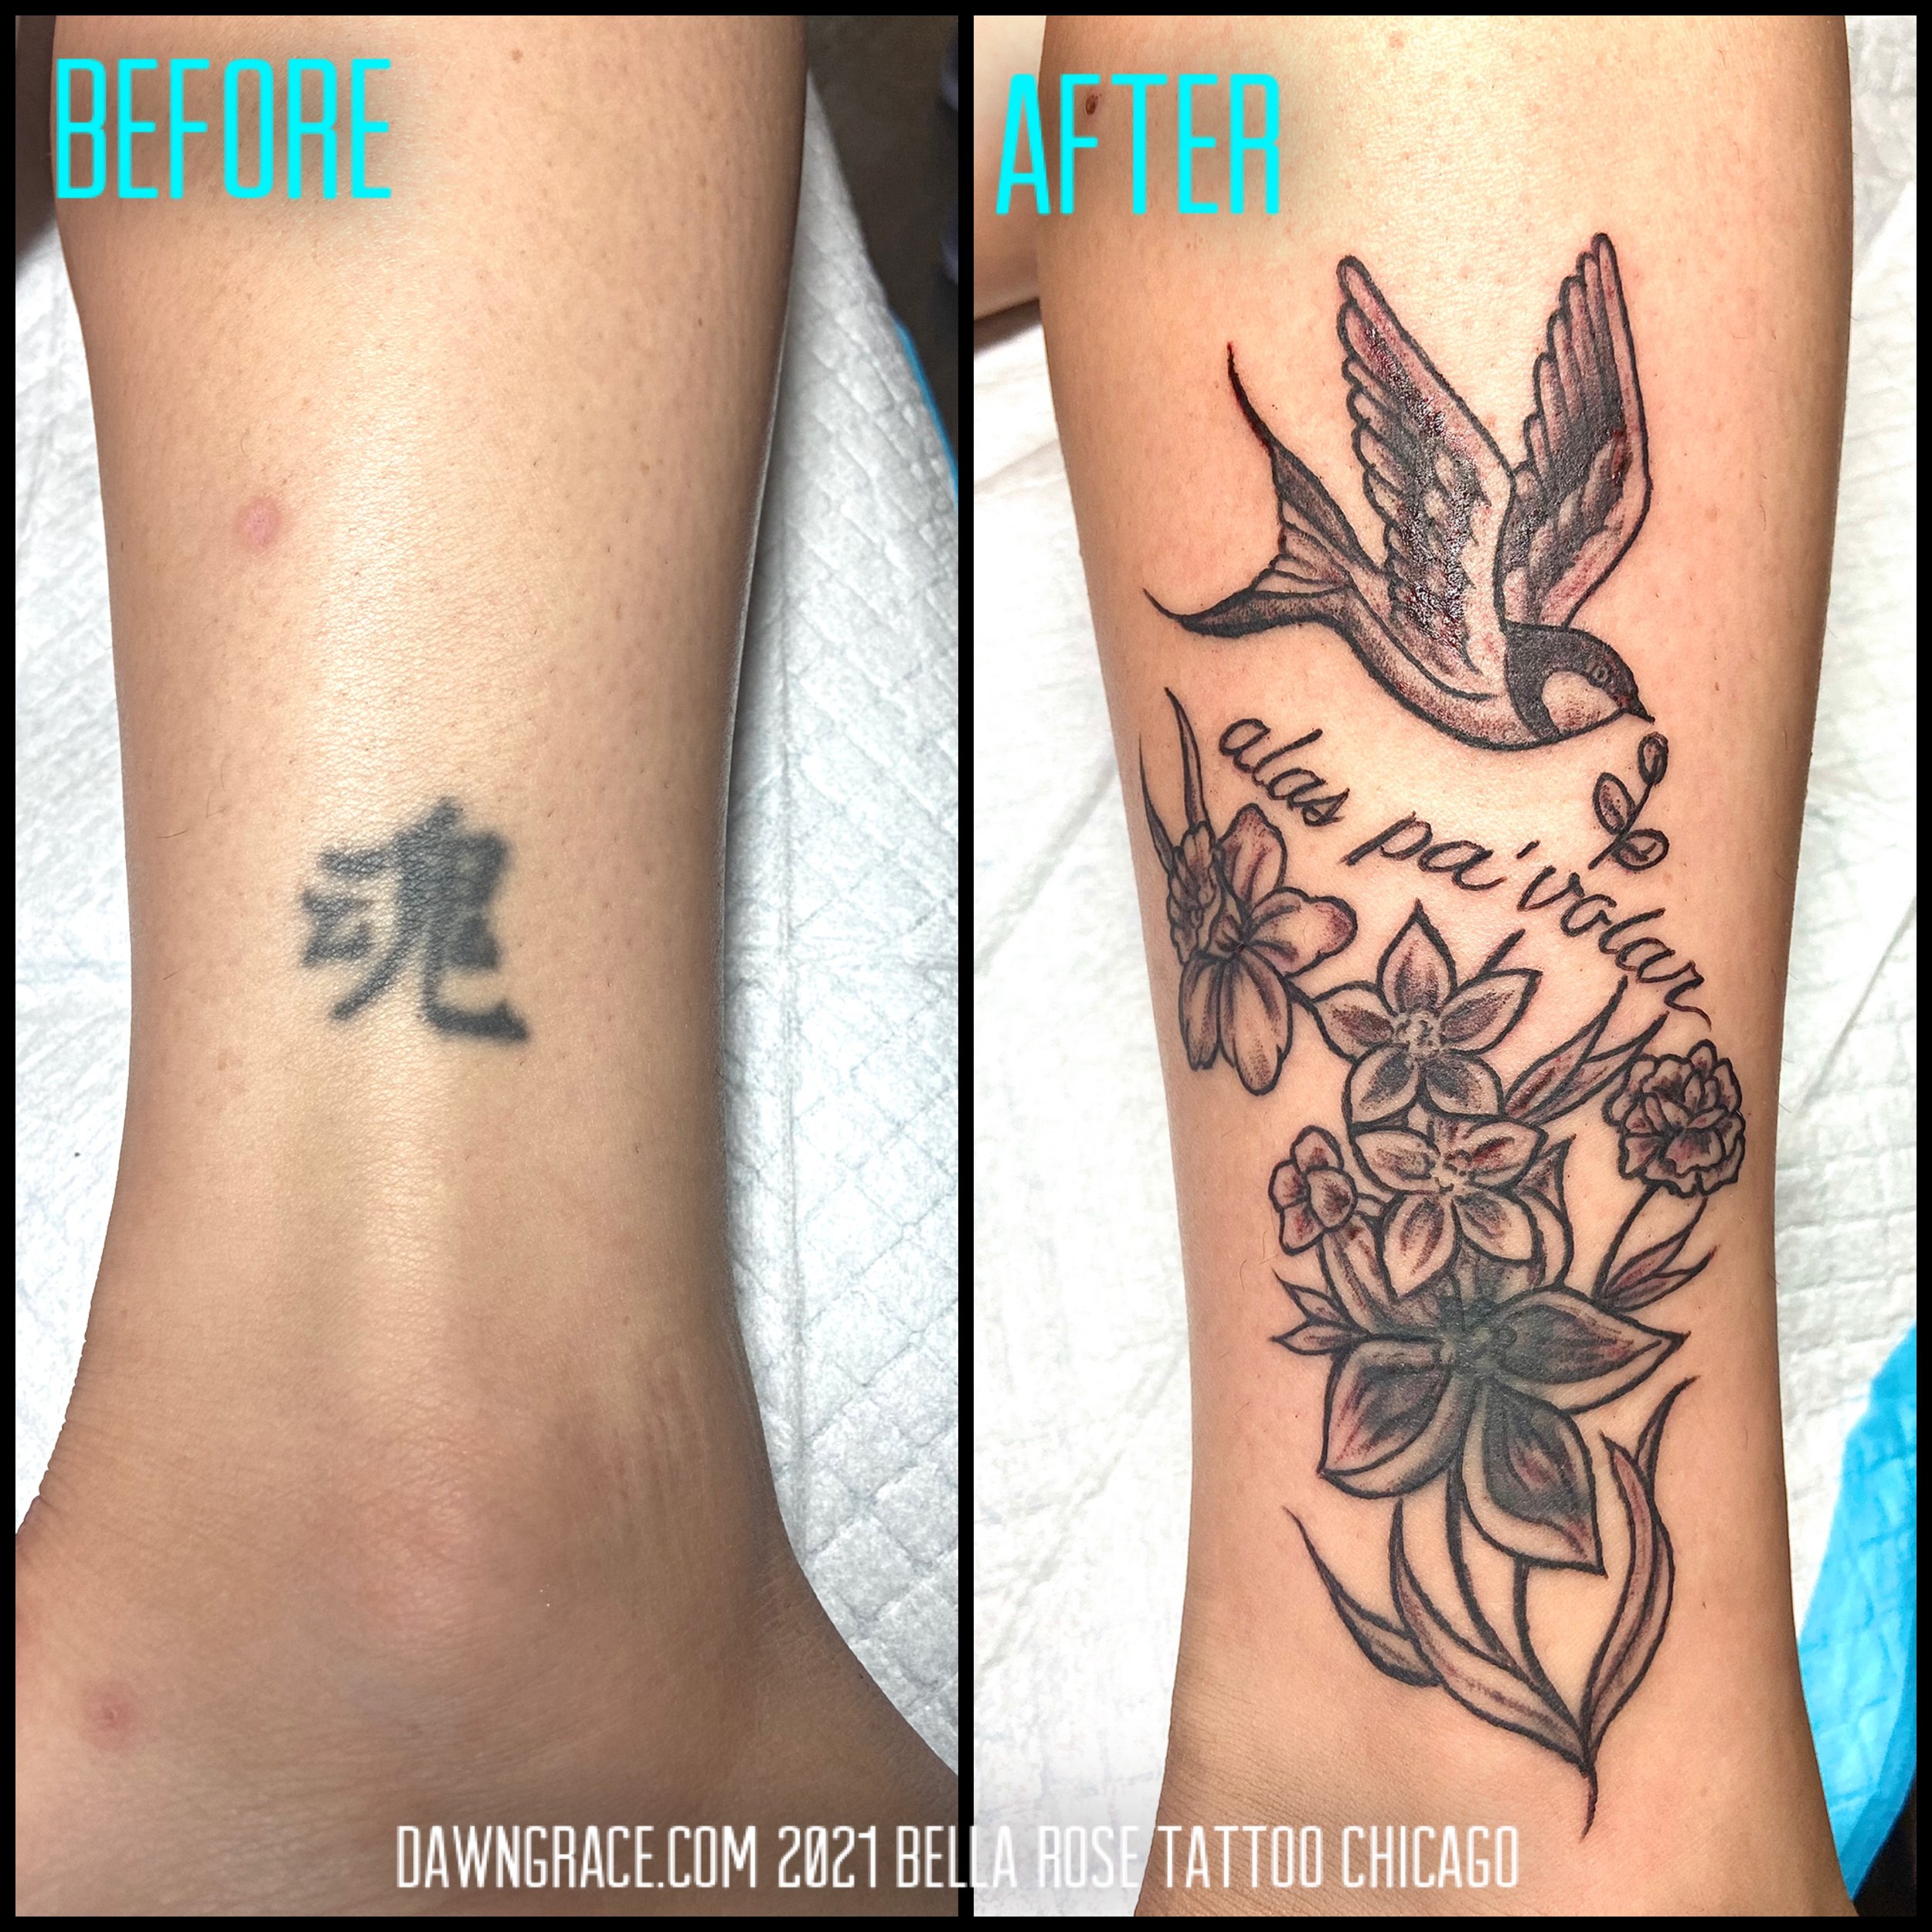 Little black bird tattoo studio  REESHAS WORK CCOVER UPS A couple OF  small before and after cover up tattoos  Facebook